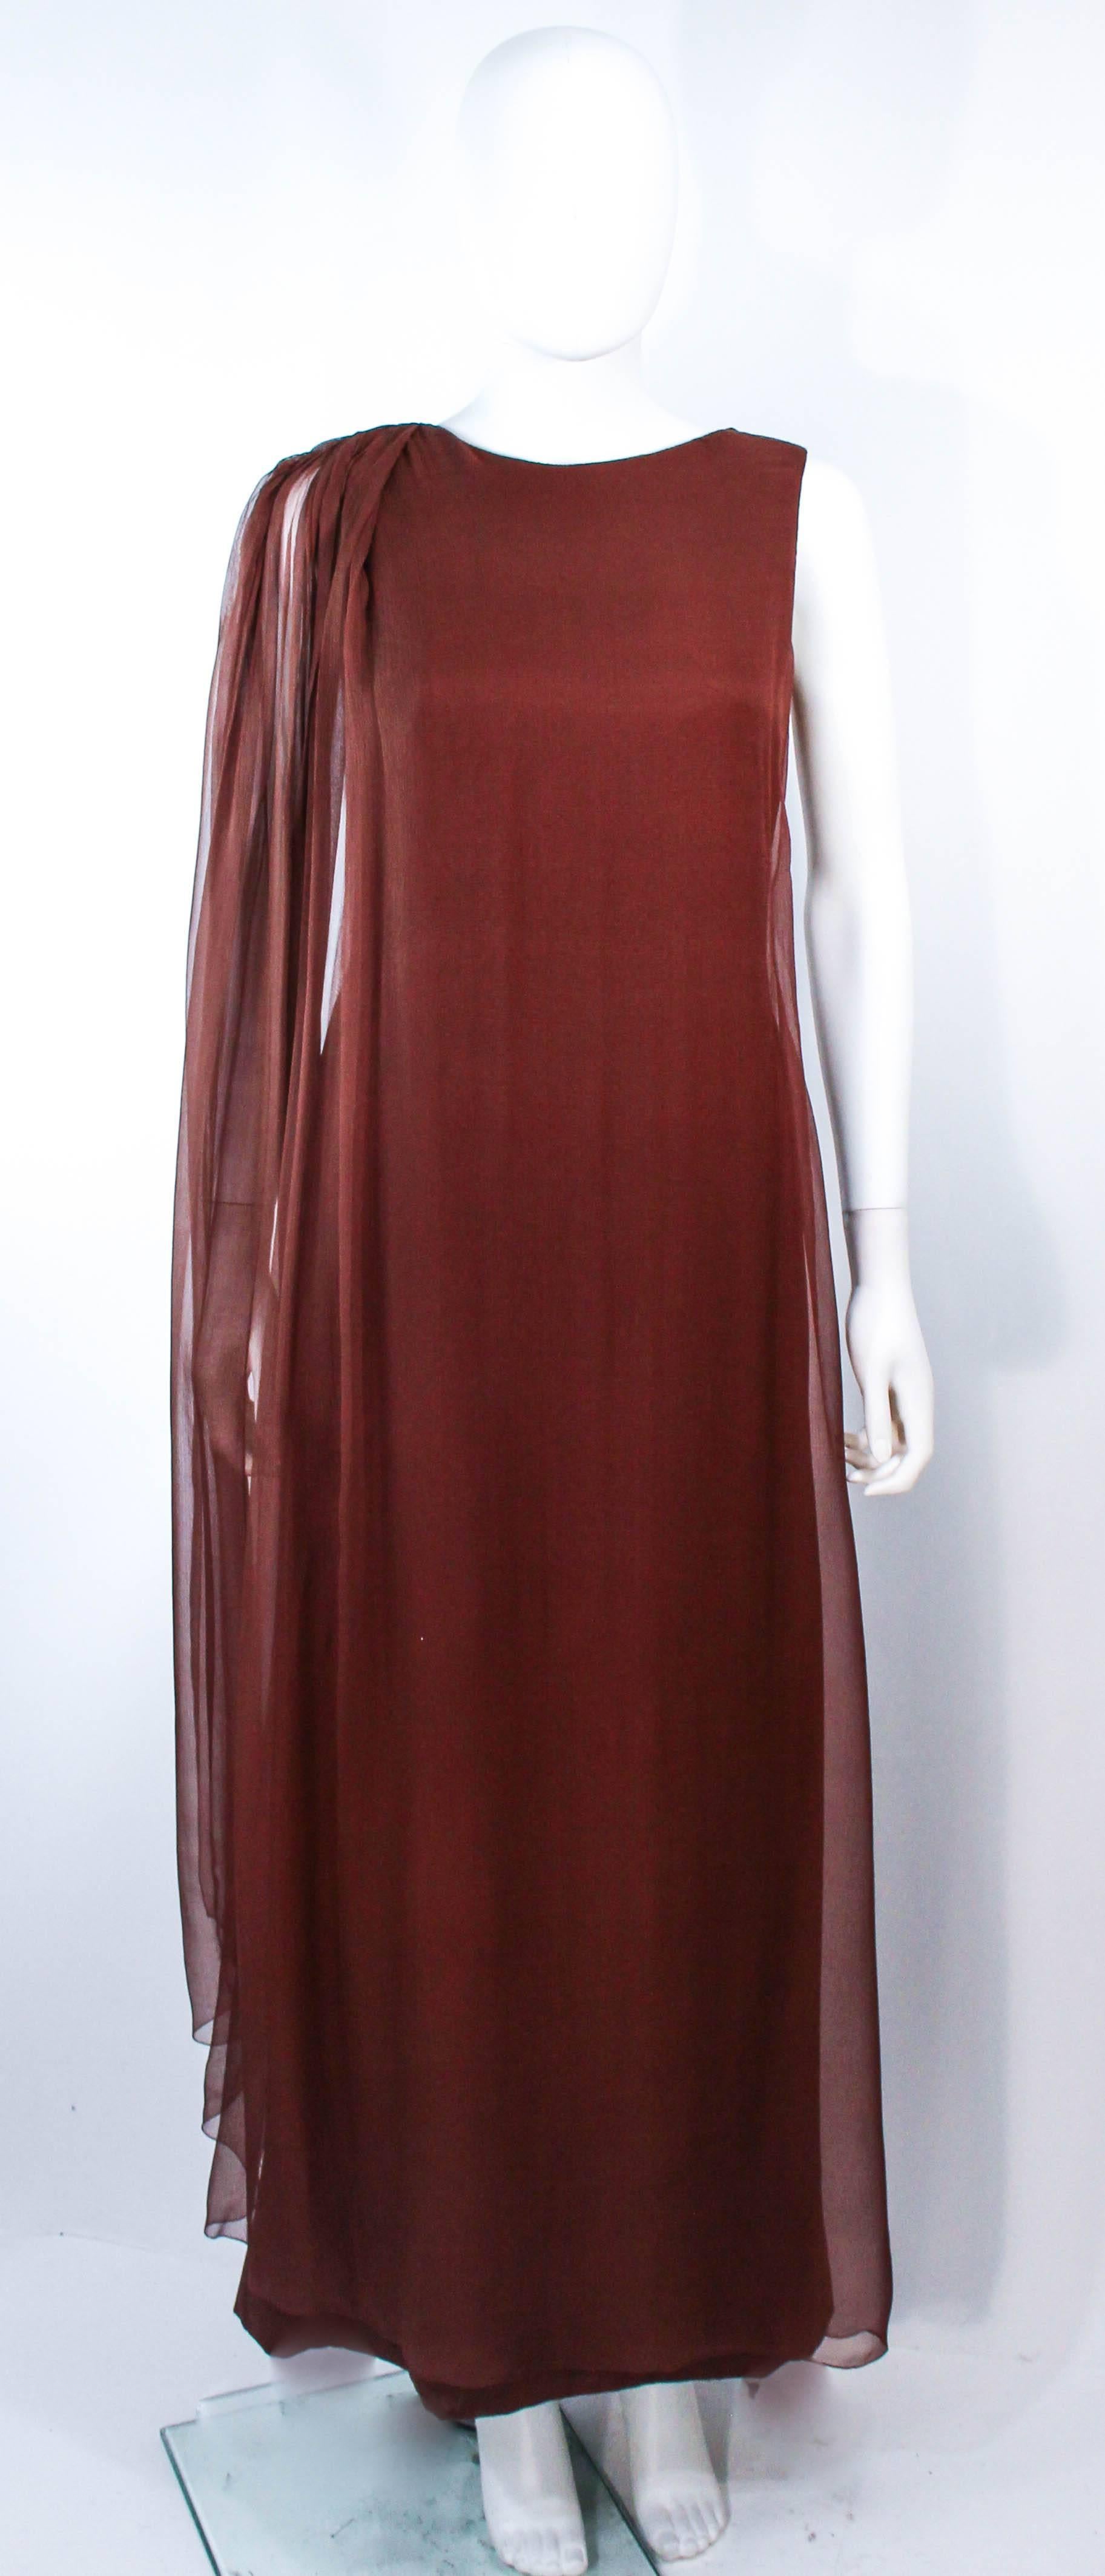 This Galanos gown is composed of a brown silk chiffon. Features a side draped style. There is a center back zipper closure. In excellent vintage condition.

**Please cross-reference measurements for personal accuracy. Size in description box is an